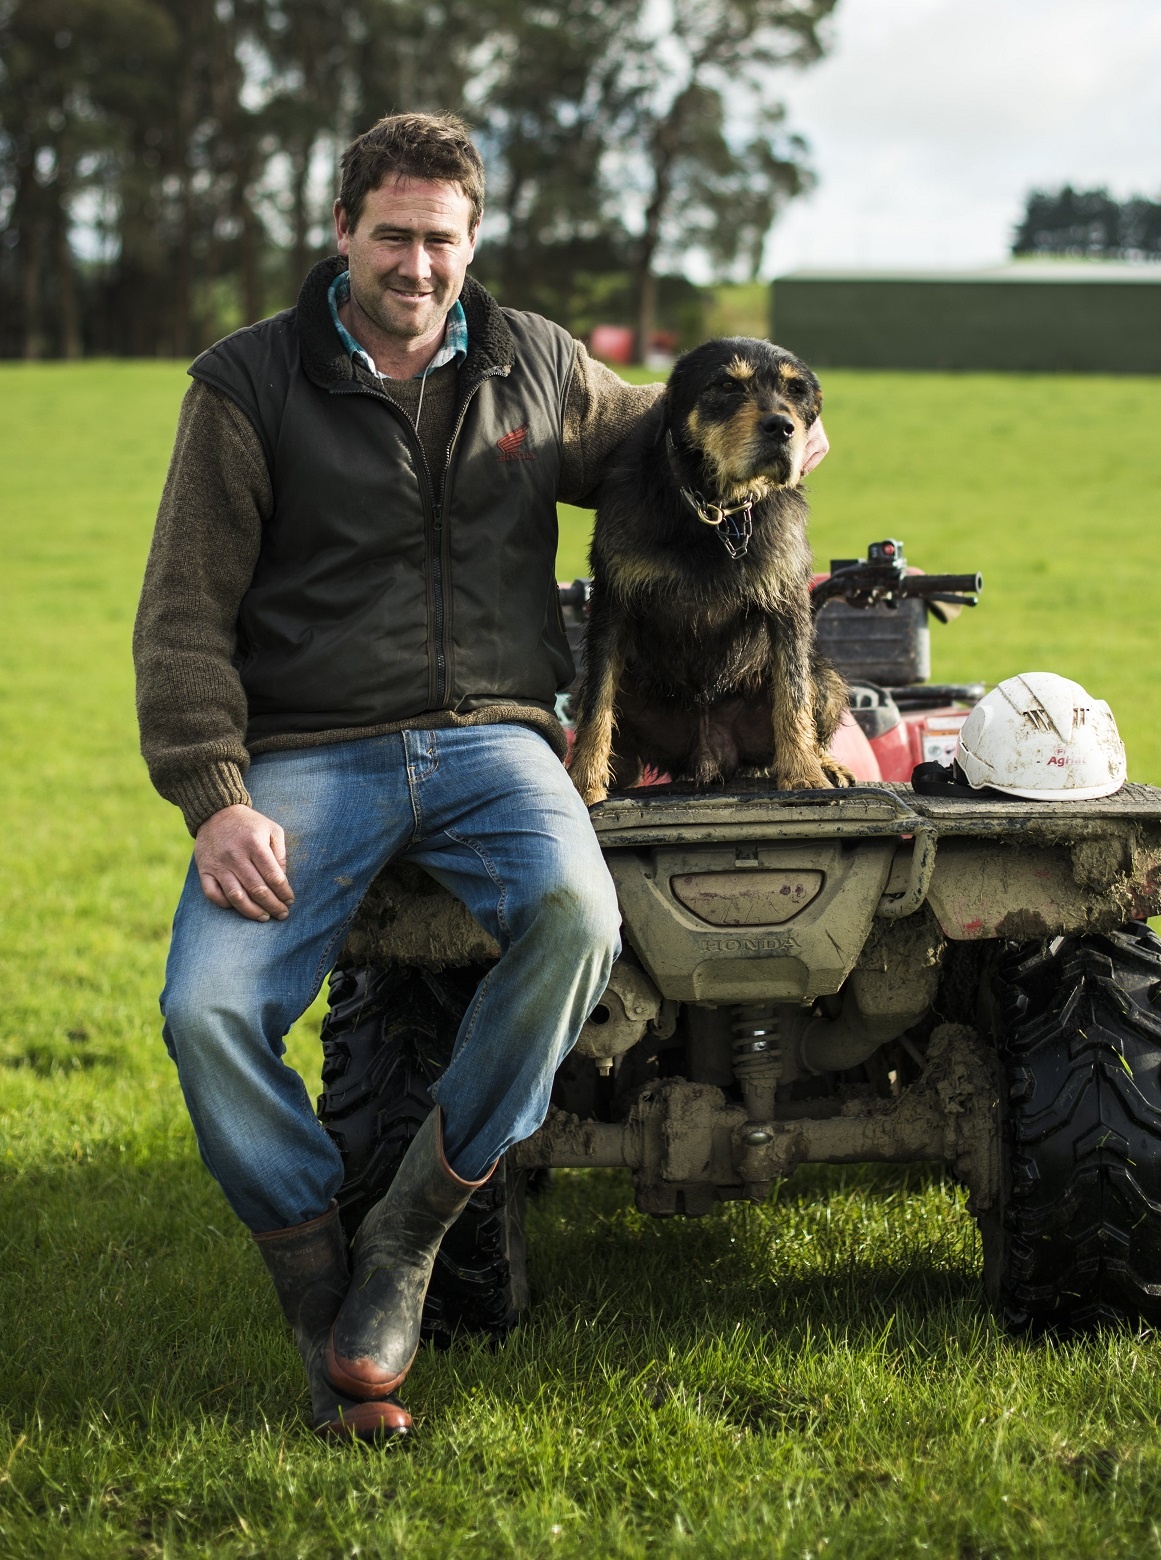 Farm software eases succession